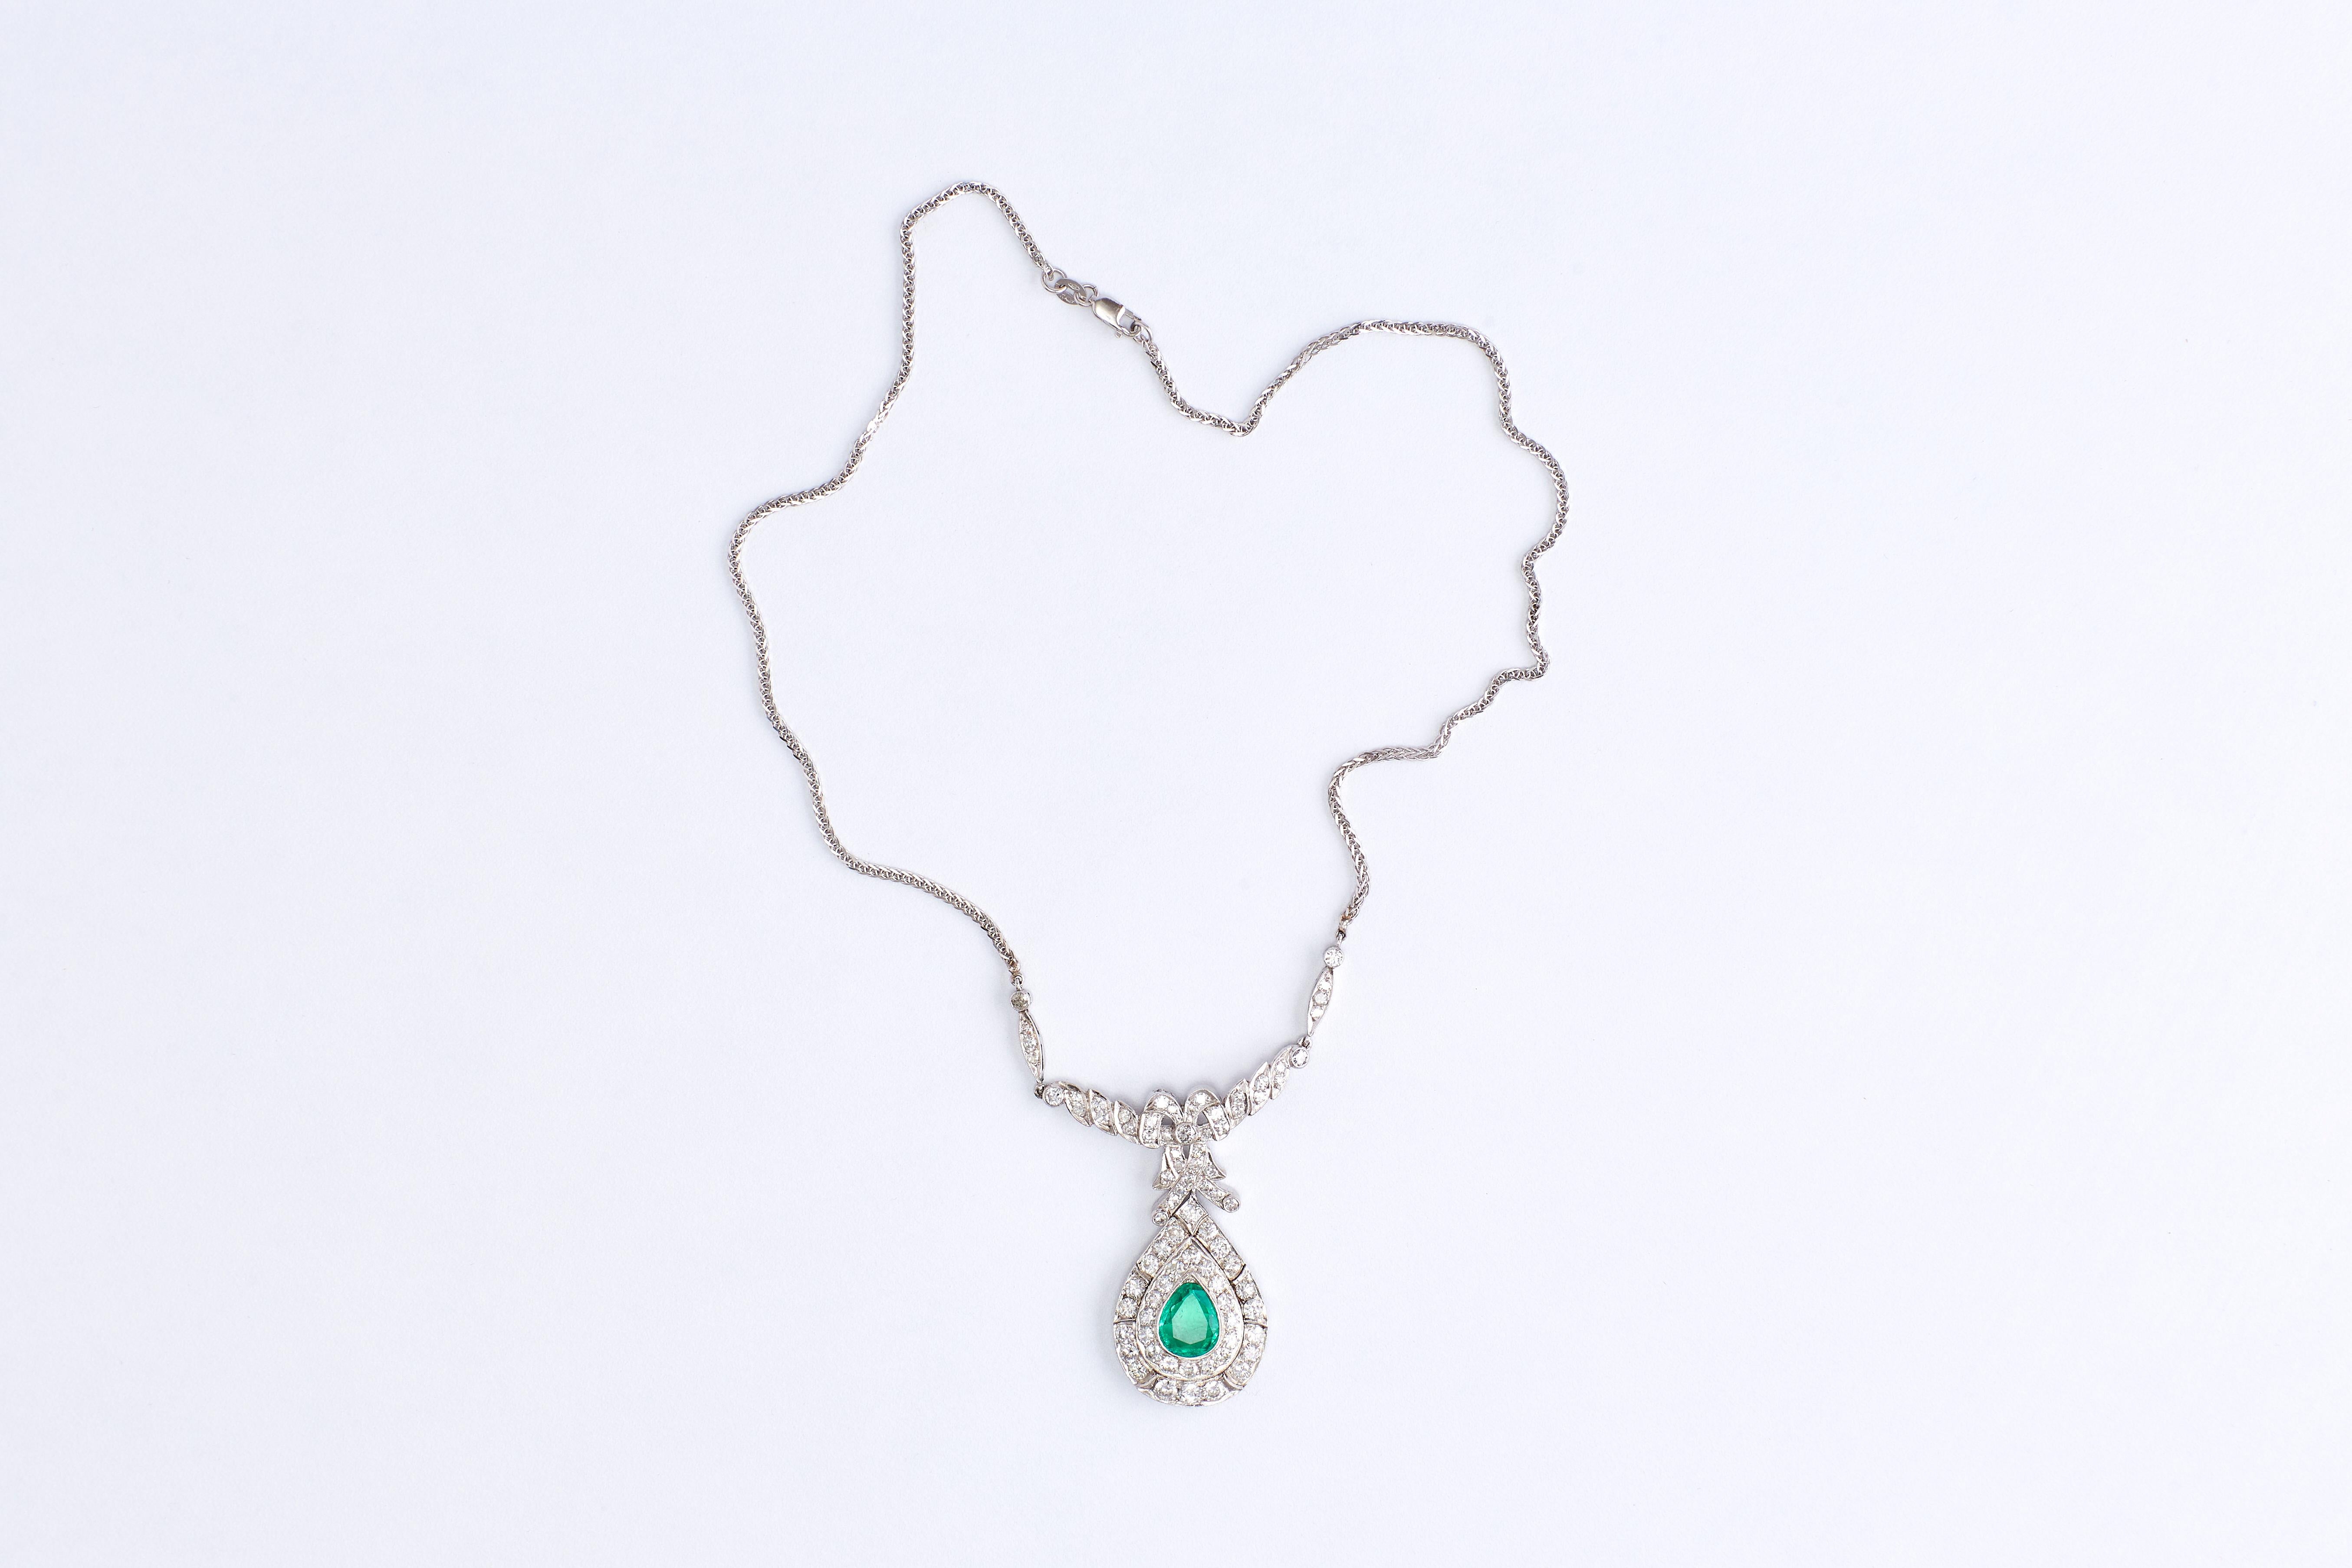 14k Gold Emerald and Diamonds Collier (Necklace)

Rememberable white gold necklace, set with 3.9 carat diamonds F VS1 and an amazing pear cut natural emerald of 1.5 carat.
Total Weight: 15.25 grams